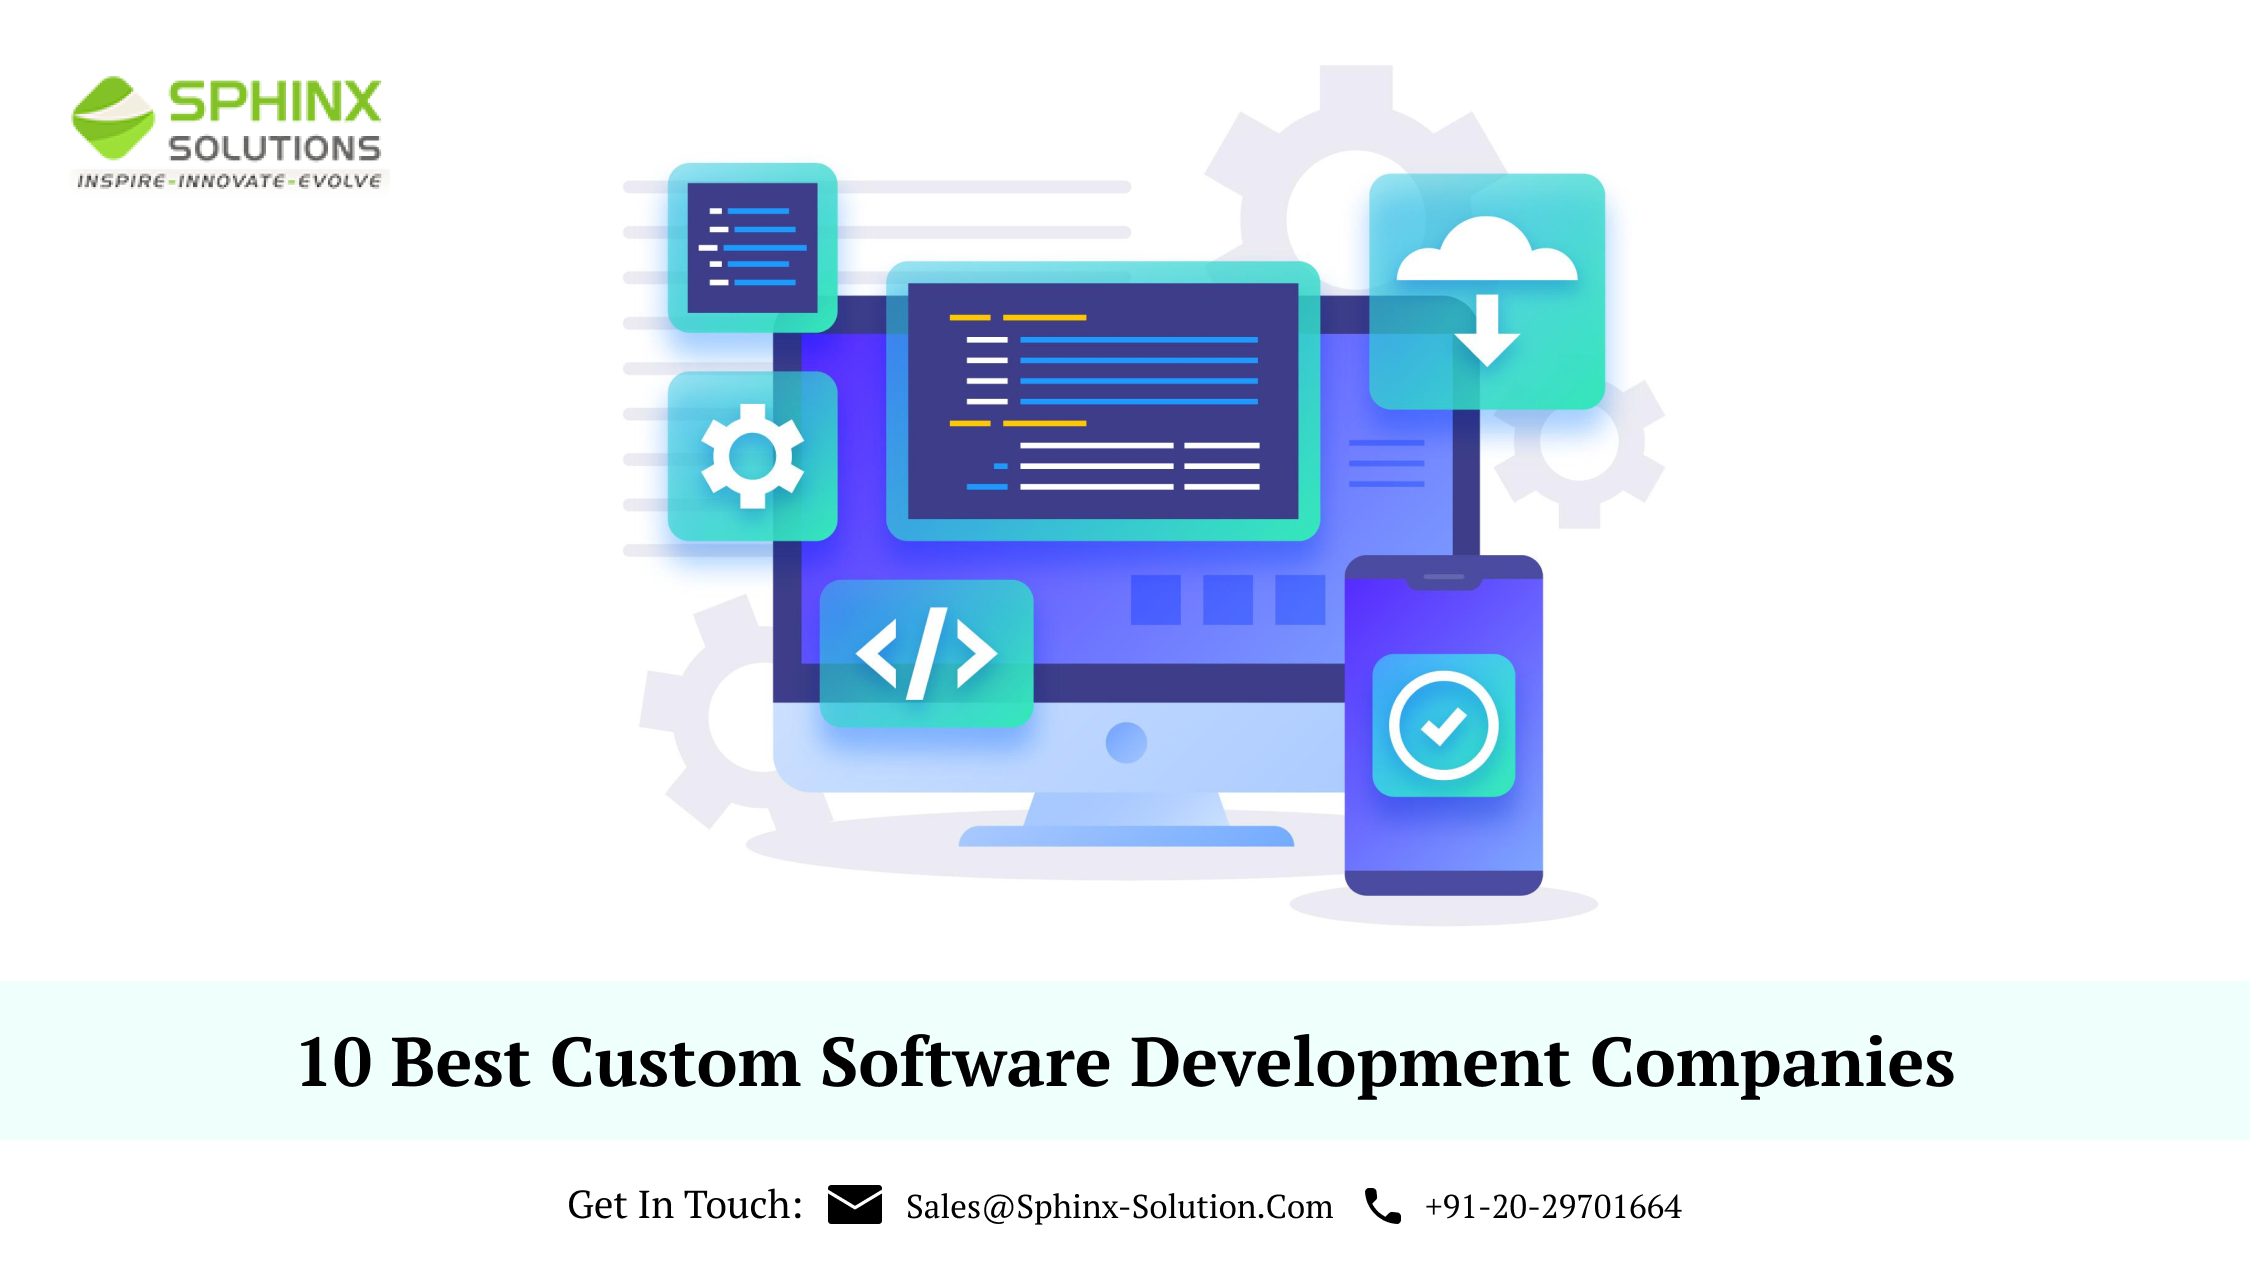 &, SPHINX

SOLUTIONS

INSPIRE - INNOVATE -EVOLVE

 

10 Best Custom Software Development Companies

Get In Touch: DM Sales@Sphinx-Solution.Com R¥ +91-20-29701664